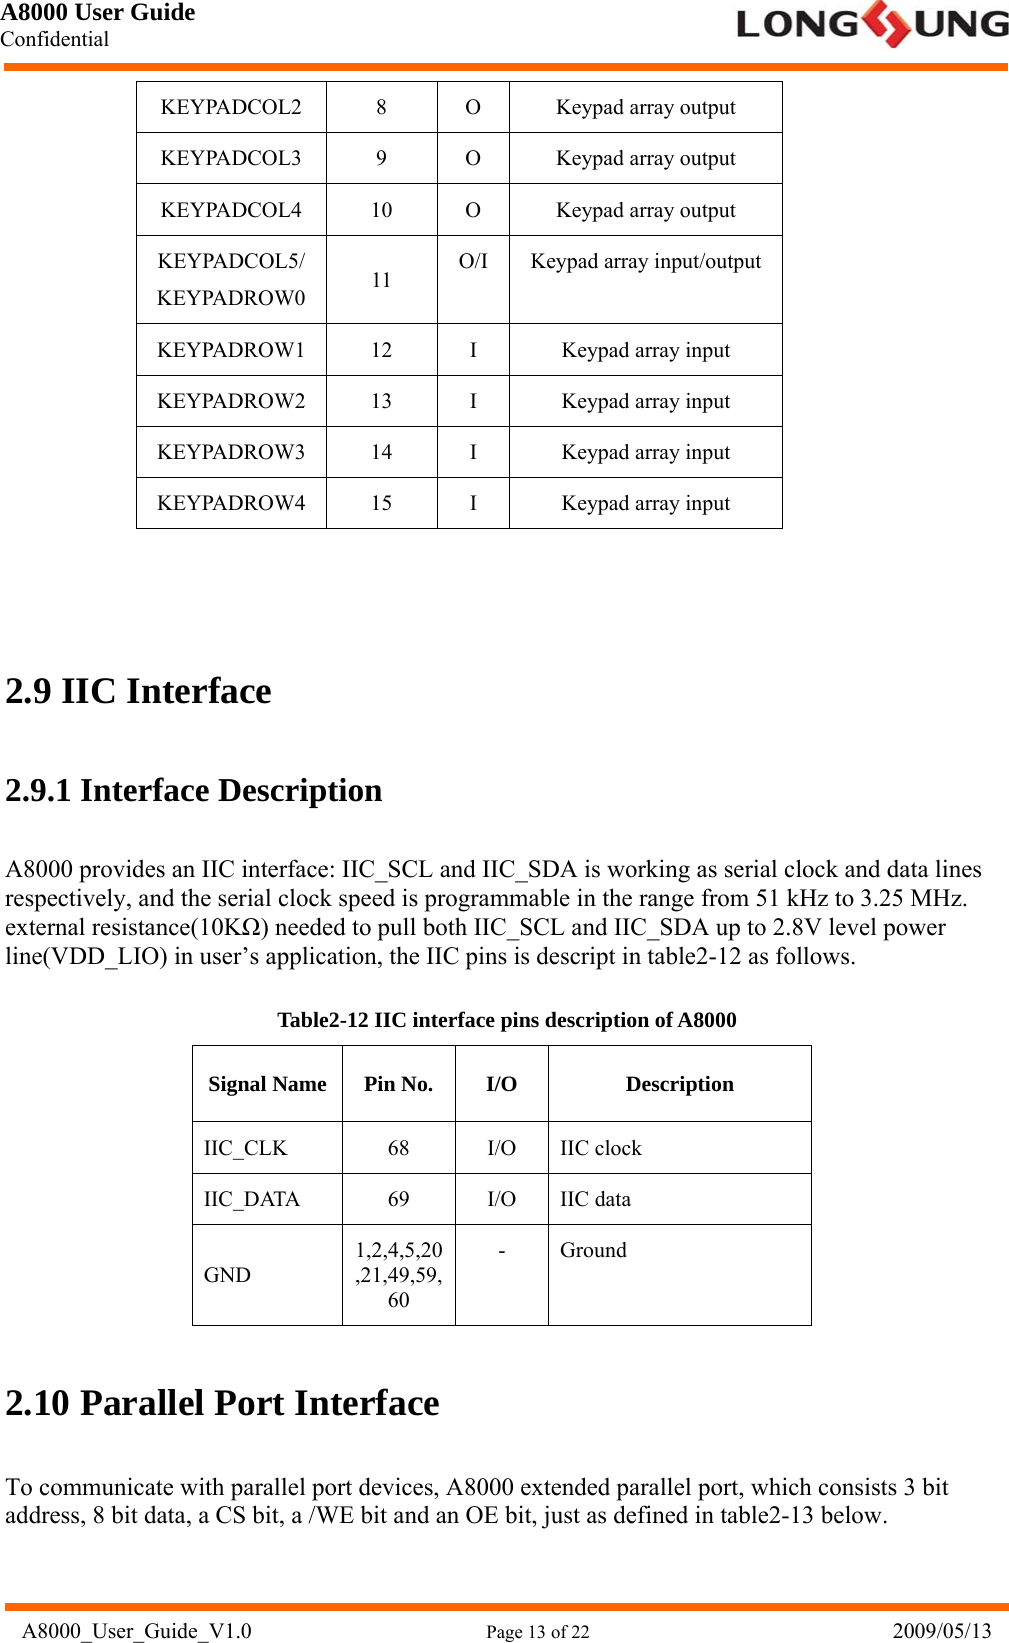 A8000 User Guide Confidential   A8000_User_Guide_V1.0                      Page 13 of 22                            2009/05/13 KEYPADCOL2 8  O Keypad array output KEYPADCOL3 9  O Keypad array output KEYPADCOL4 10  O  Keypad array output KEYPADCOL5/ KEYPADROW0  11  O/I Keypad array input/output KEYPADROW1 12  I  Keypad array input KEYPADROW2 13  I  Keypad array input KEYPADROW3 14  I  Keypad array input KEYPADROW4 15  I  Keypad array input    2.9 IIC Interface 2.9.1 Interface Description A8000 provides an IIC interface: IIC_SCL and IIC_SDA is working as serial clock and data lines respectively, and the serial clock speed is programmable in the range from 51 kHz to 3.25 MHz. external resistance(10KΩ) needed to pull both IIC_SCL and IIC_SDA up to 2.8V level power line(VDD_LIO) in user’s application, the IIC pins is descript in table2-12 as follows. Table2-12 IIC interface pins description of A8000 Signal Name  Pin No.  I/O  Description IIC_CLK 68 I/O IIC clock IIC_DATA 69 I/O IIC data GND 1,2,4,5,20,21,49,59,60 - Ground 2.10 Parallel Port Interface To communicate with parallel port devices, A8000 extended parallel port, which consists 3 bit address, 8 bit data, a CS bit, a /WE bit and an OE bit, just as defined in table2-13 below. 